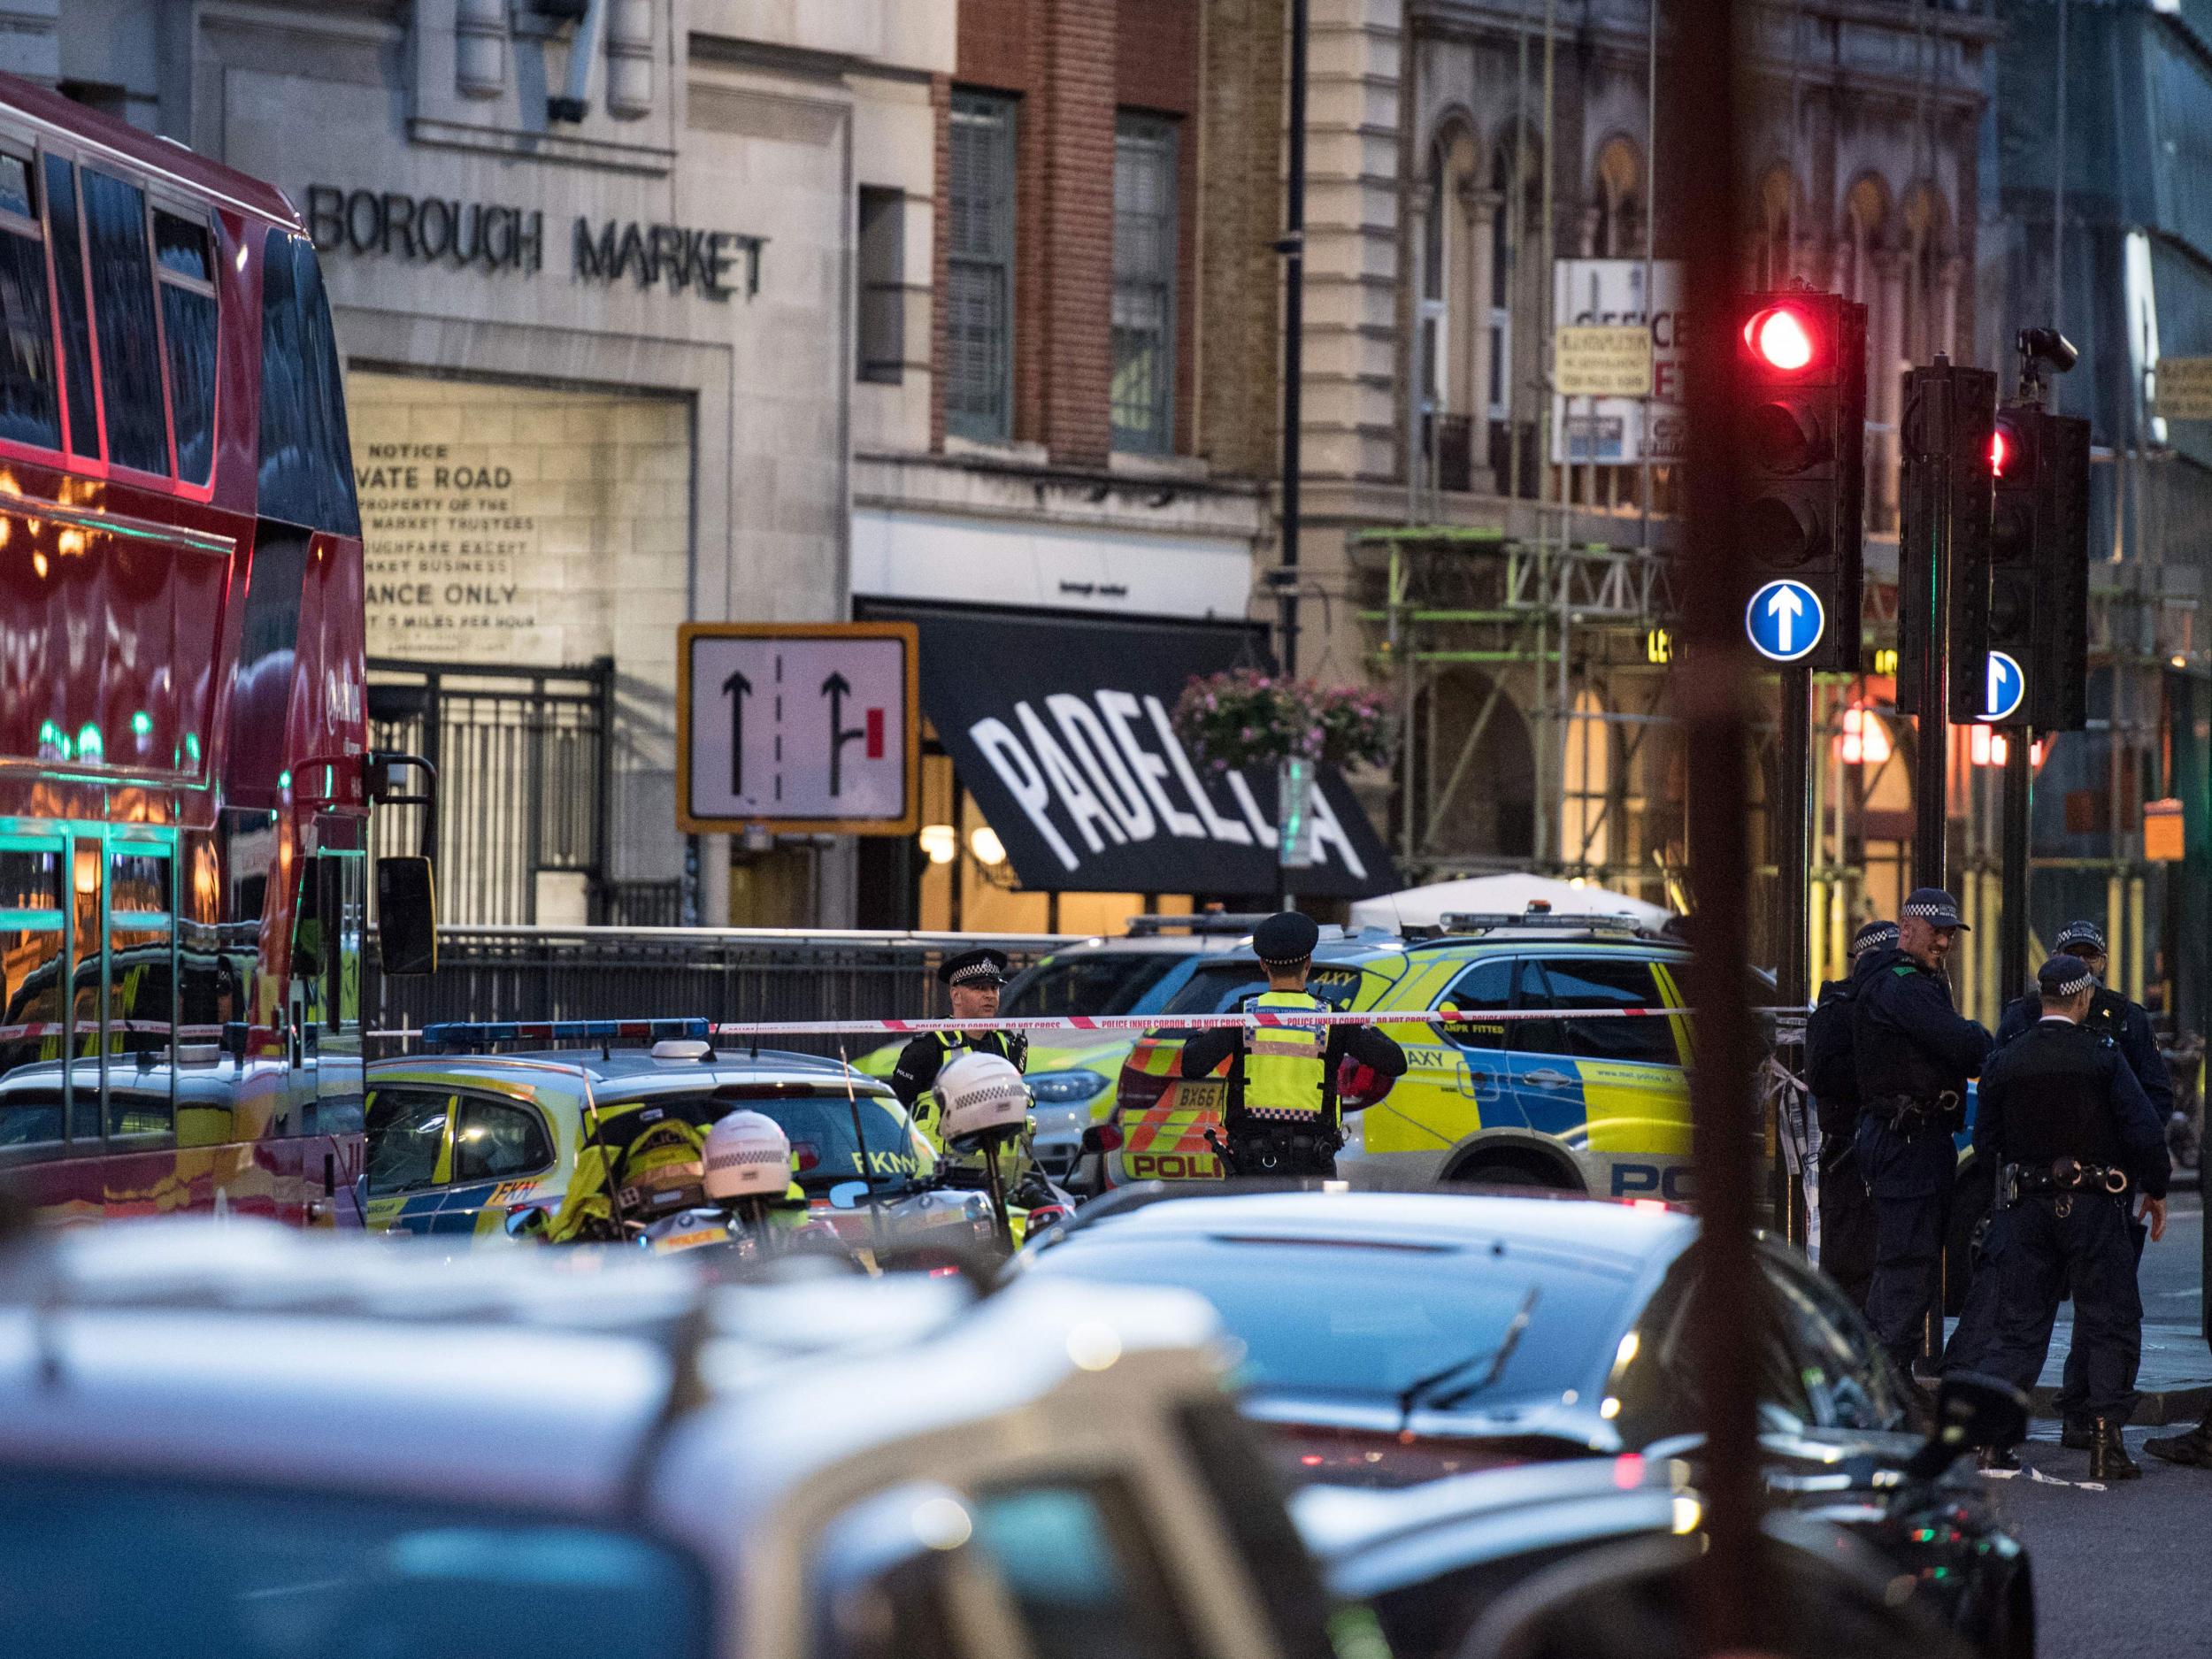 Keeping calm: the shock of the attack has failed to push Londoners into a state of panic